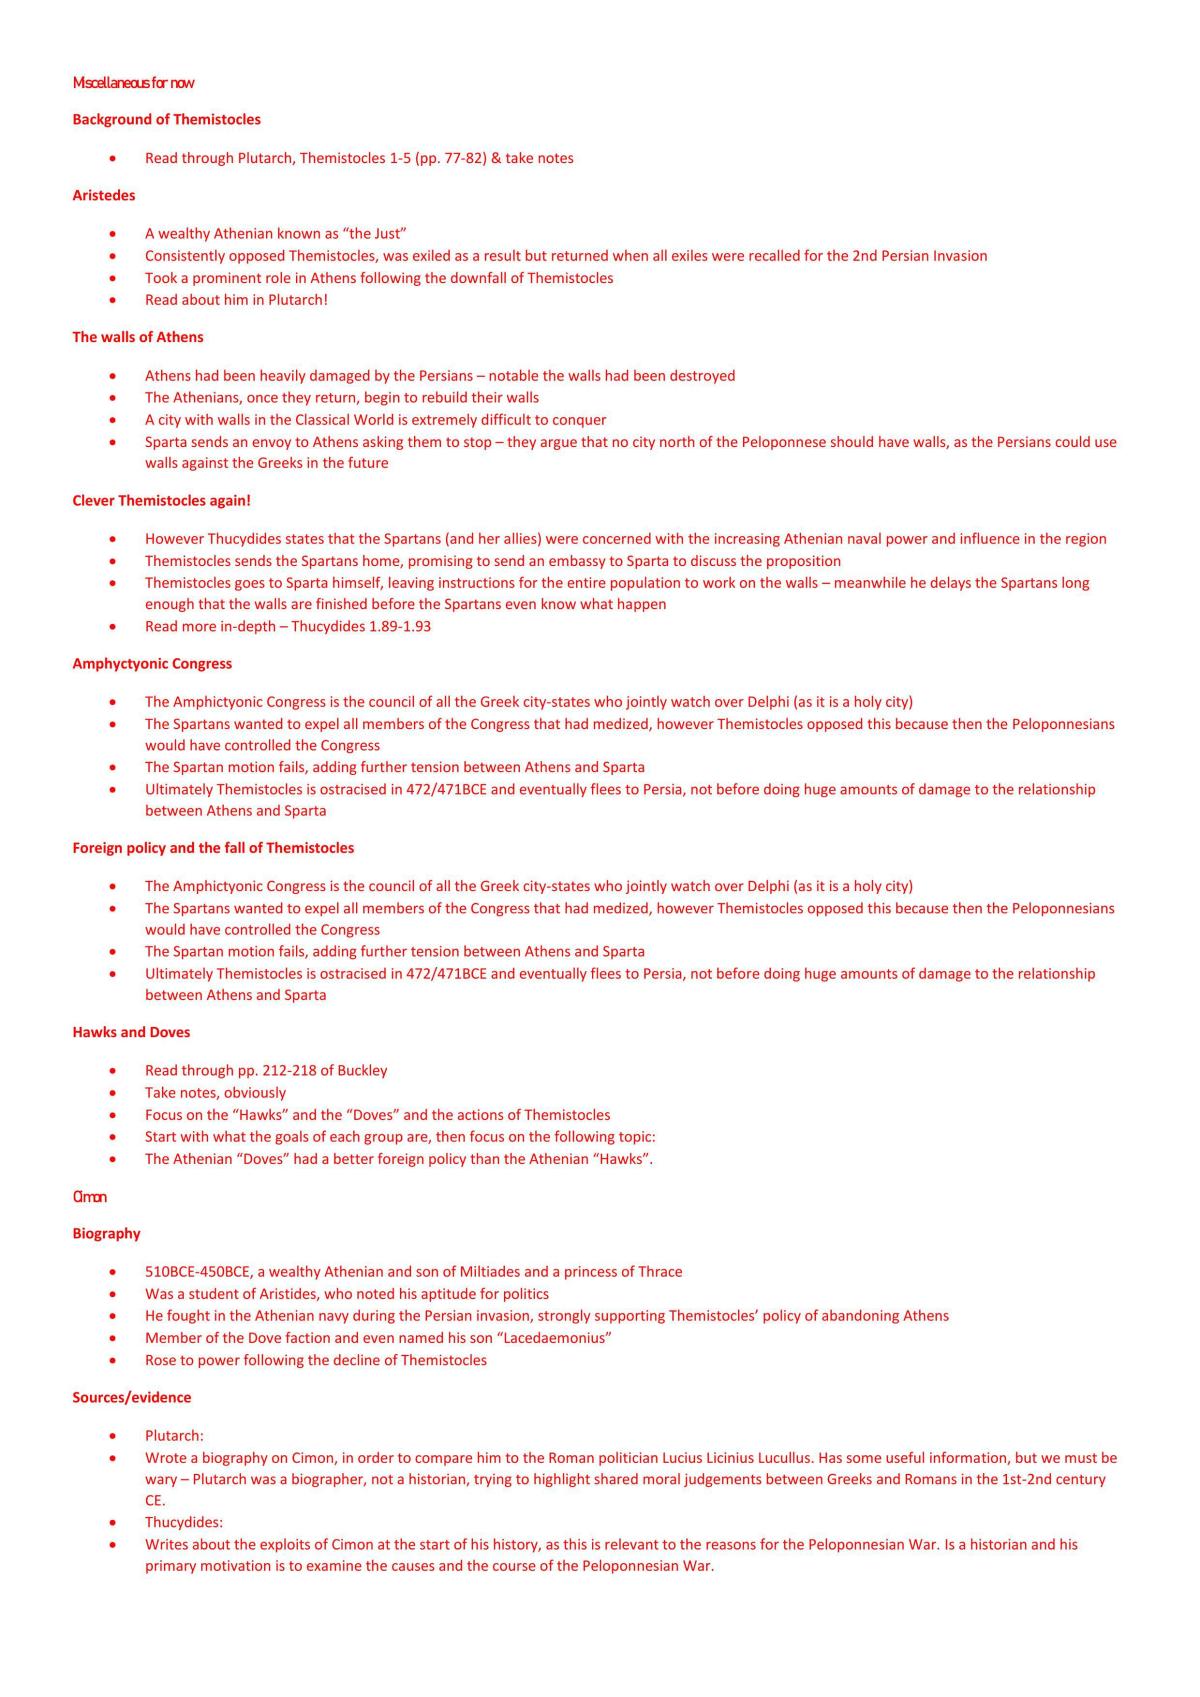 Complete Unit 1 Exam Notes  - Page 11